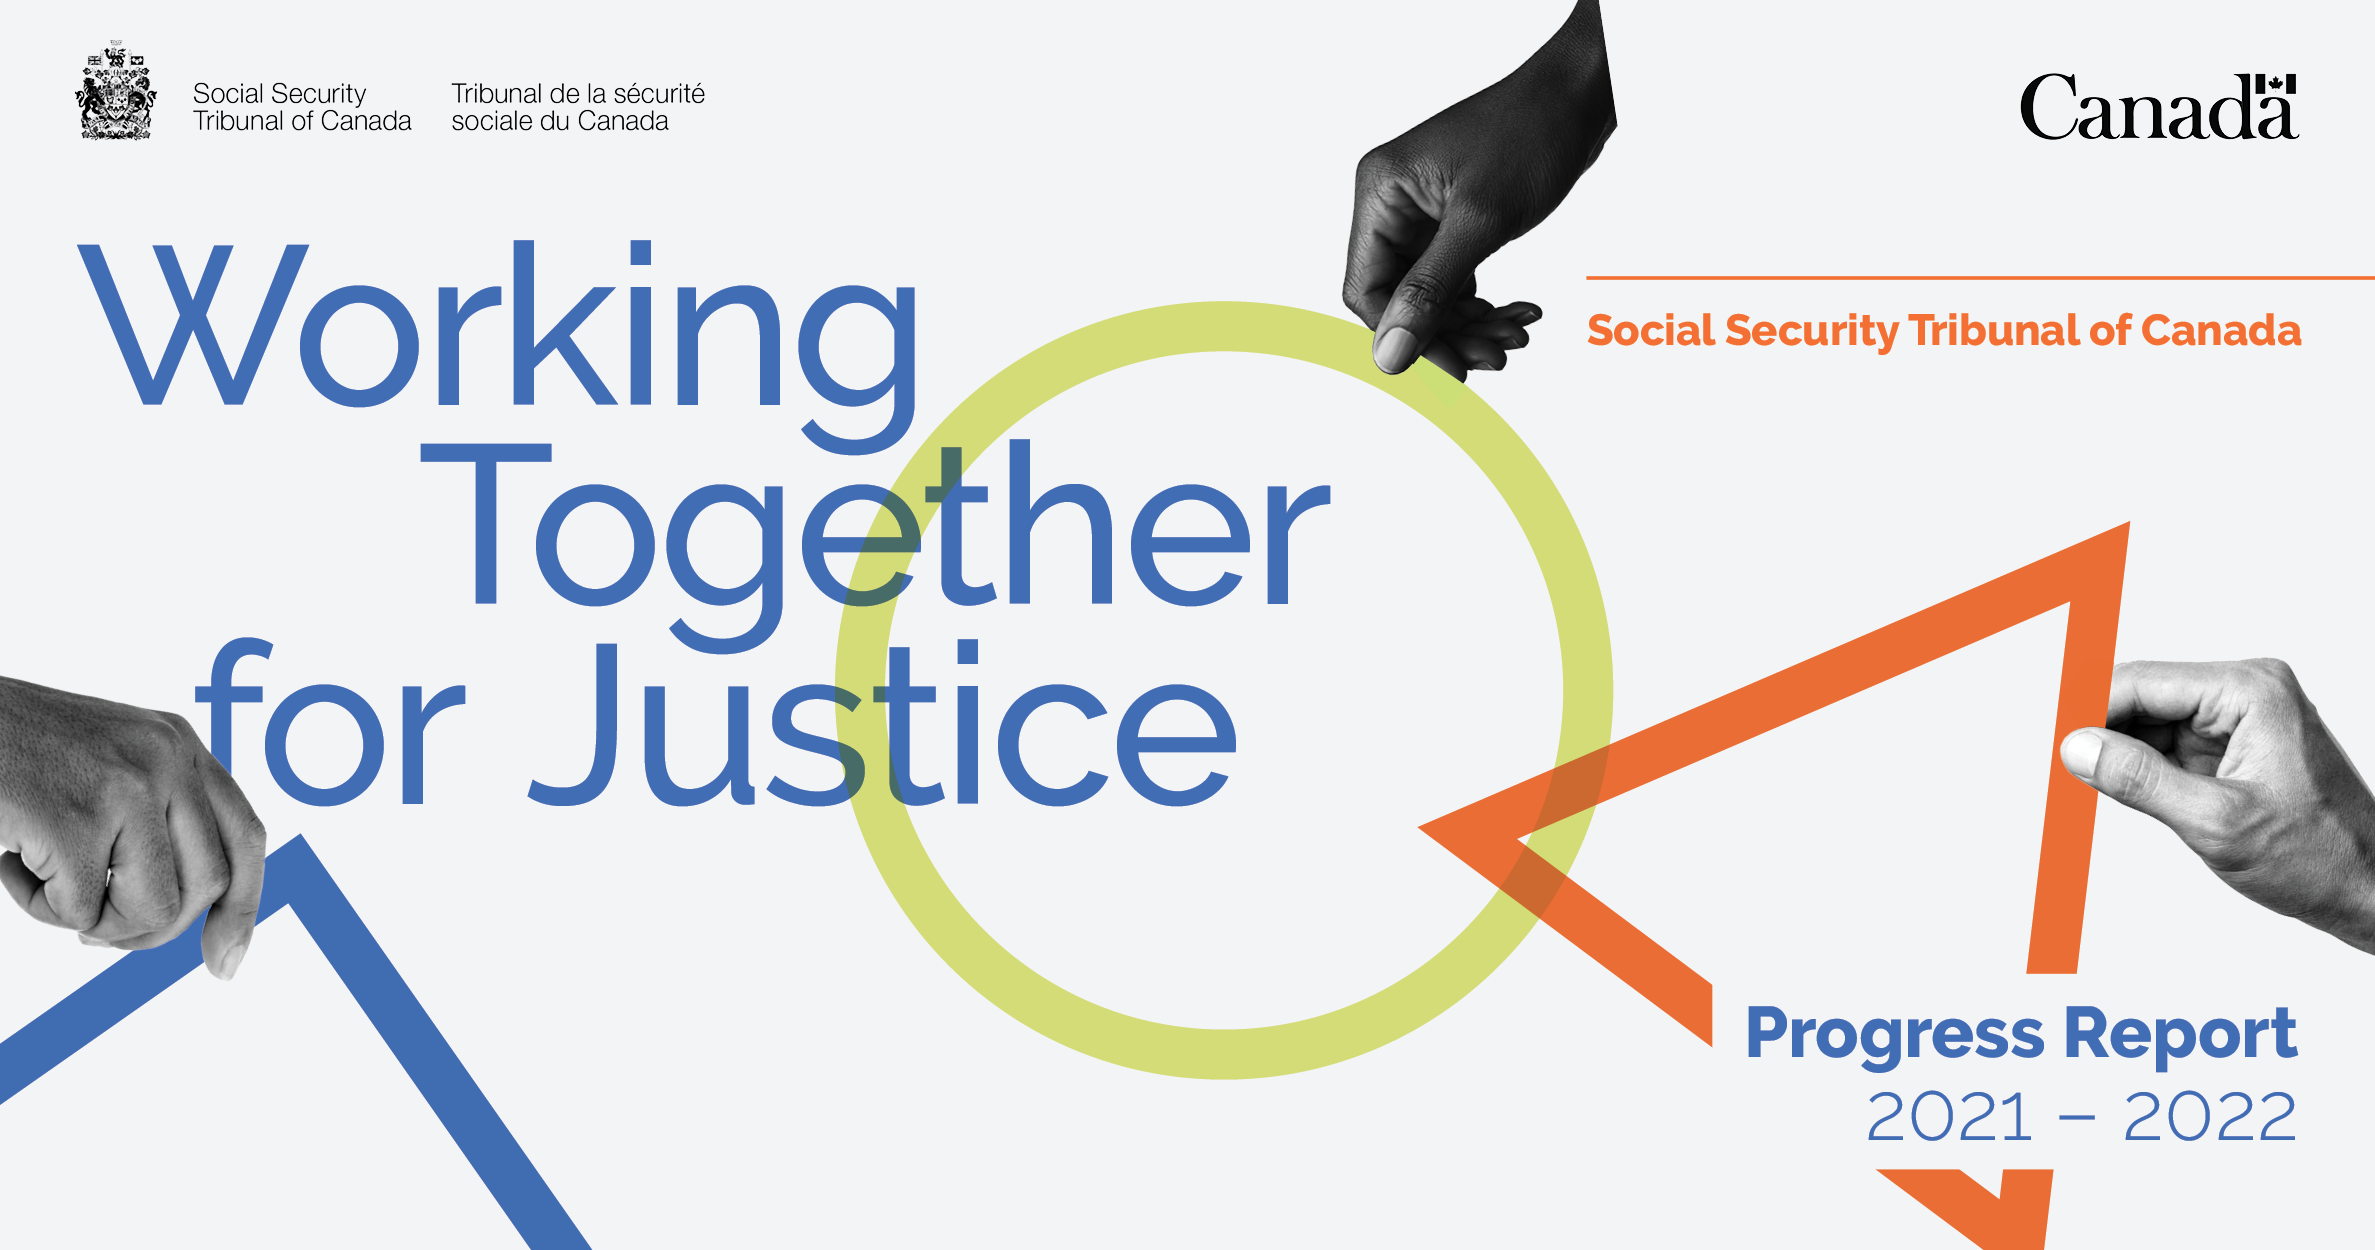 Social Security Tribunal of Canada Together for justice Progress Report 2021-2022